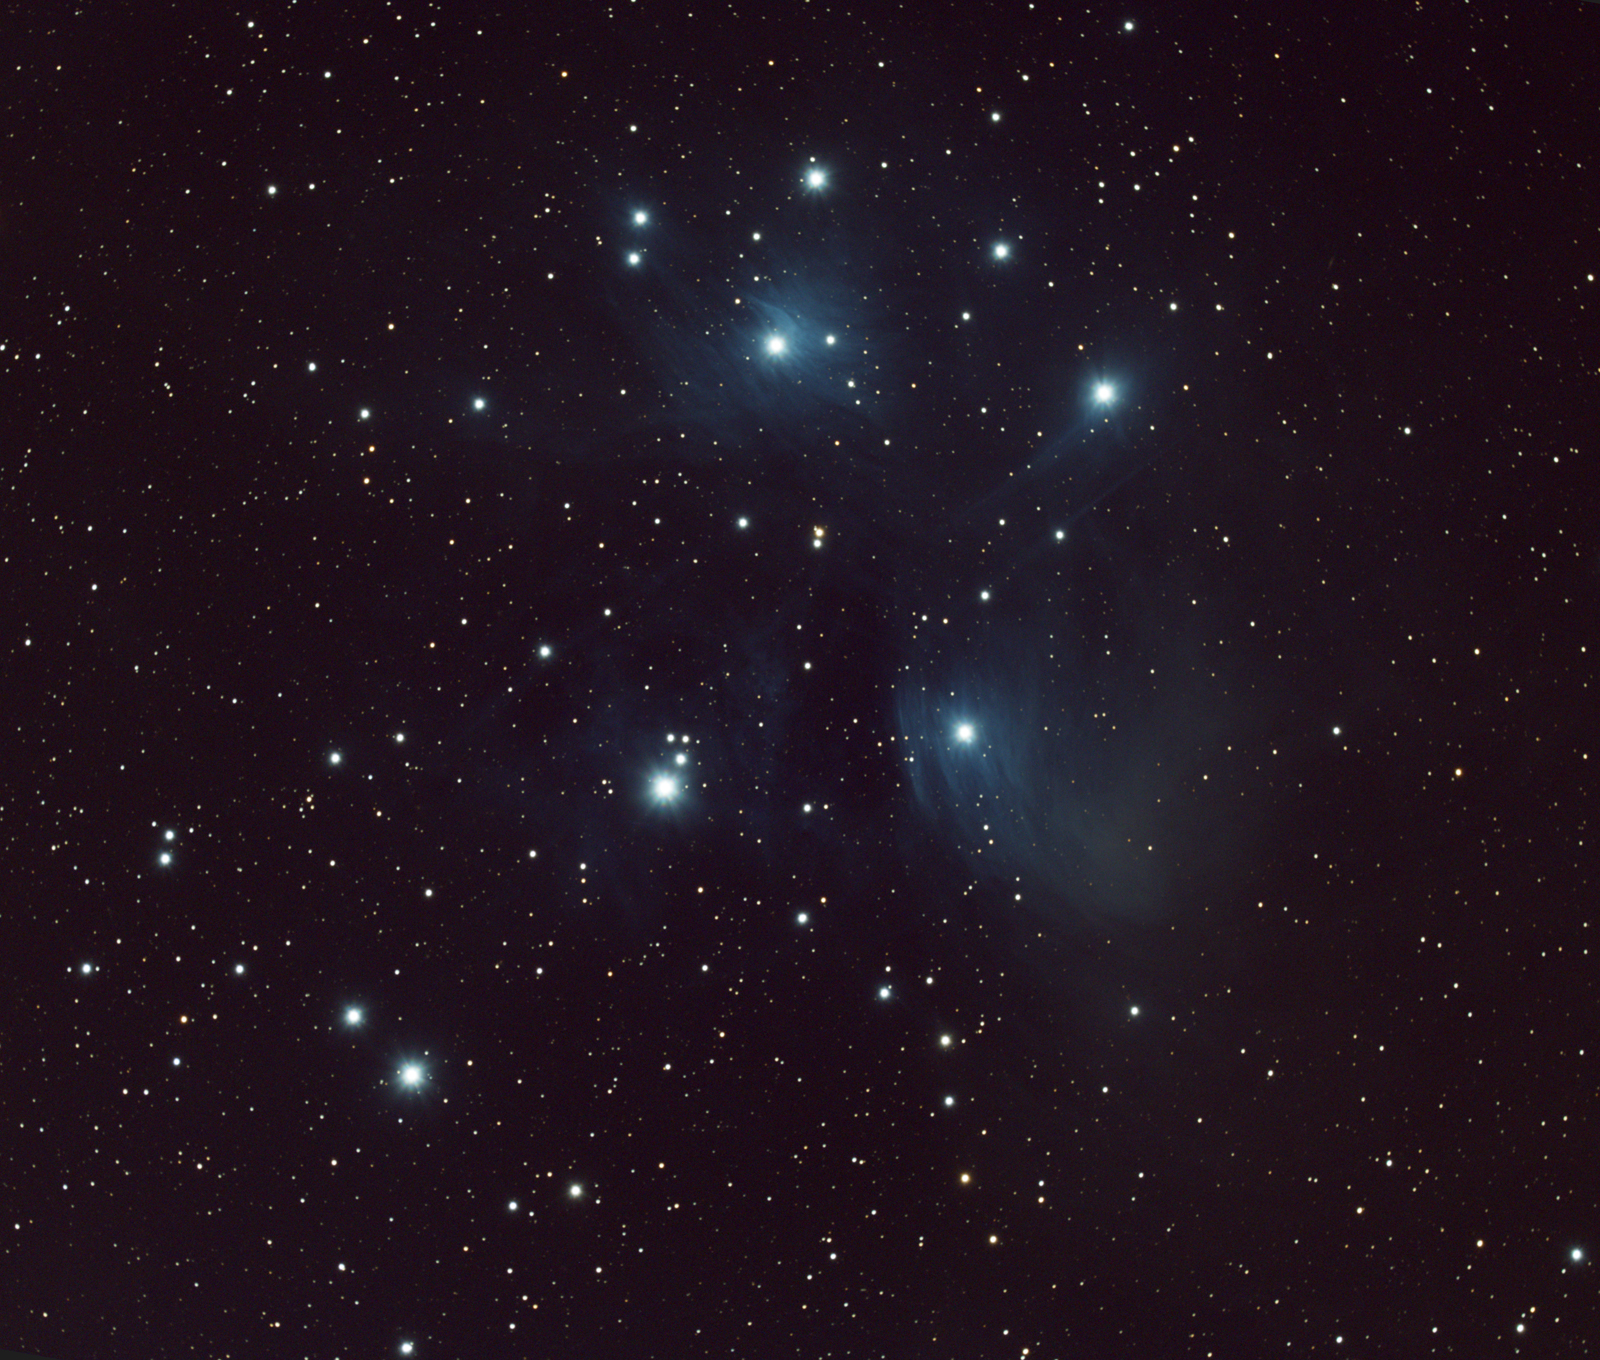 M45 c11f2 2600 g120 br10 nofilter 83F 1245S NoEdit 11182022m